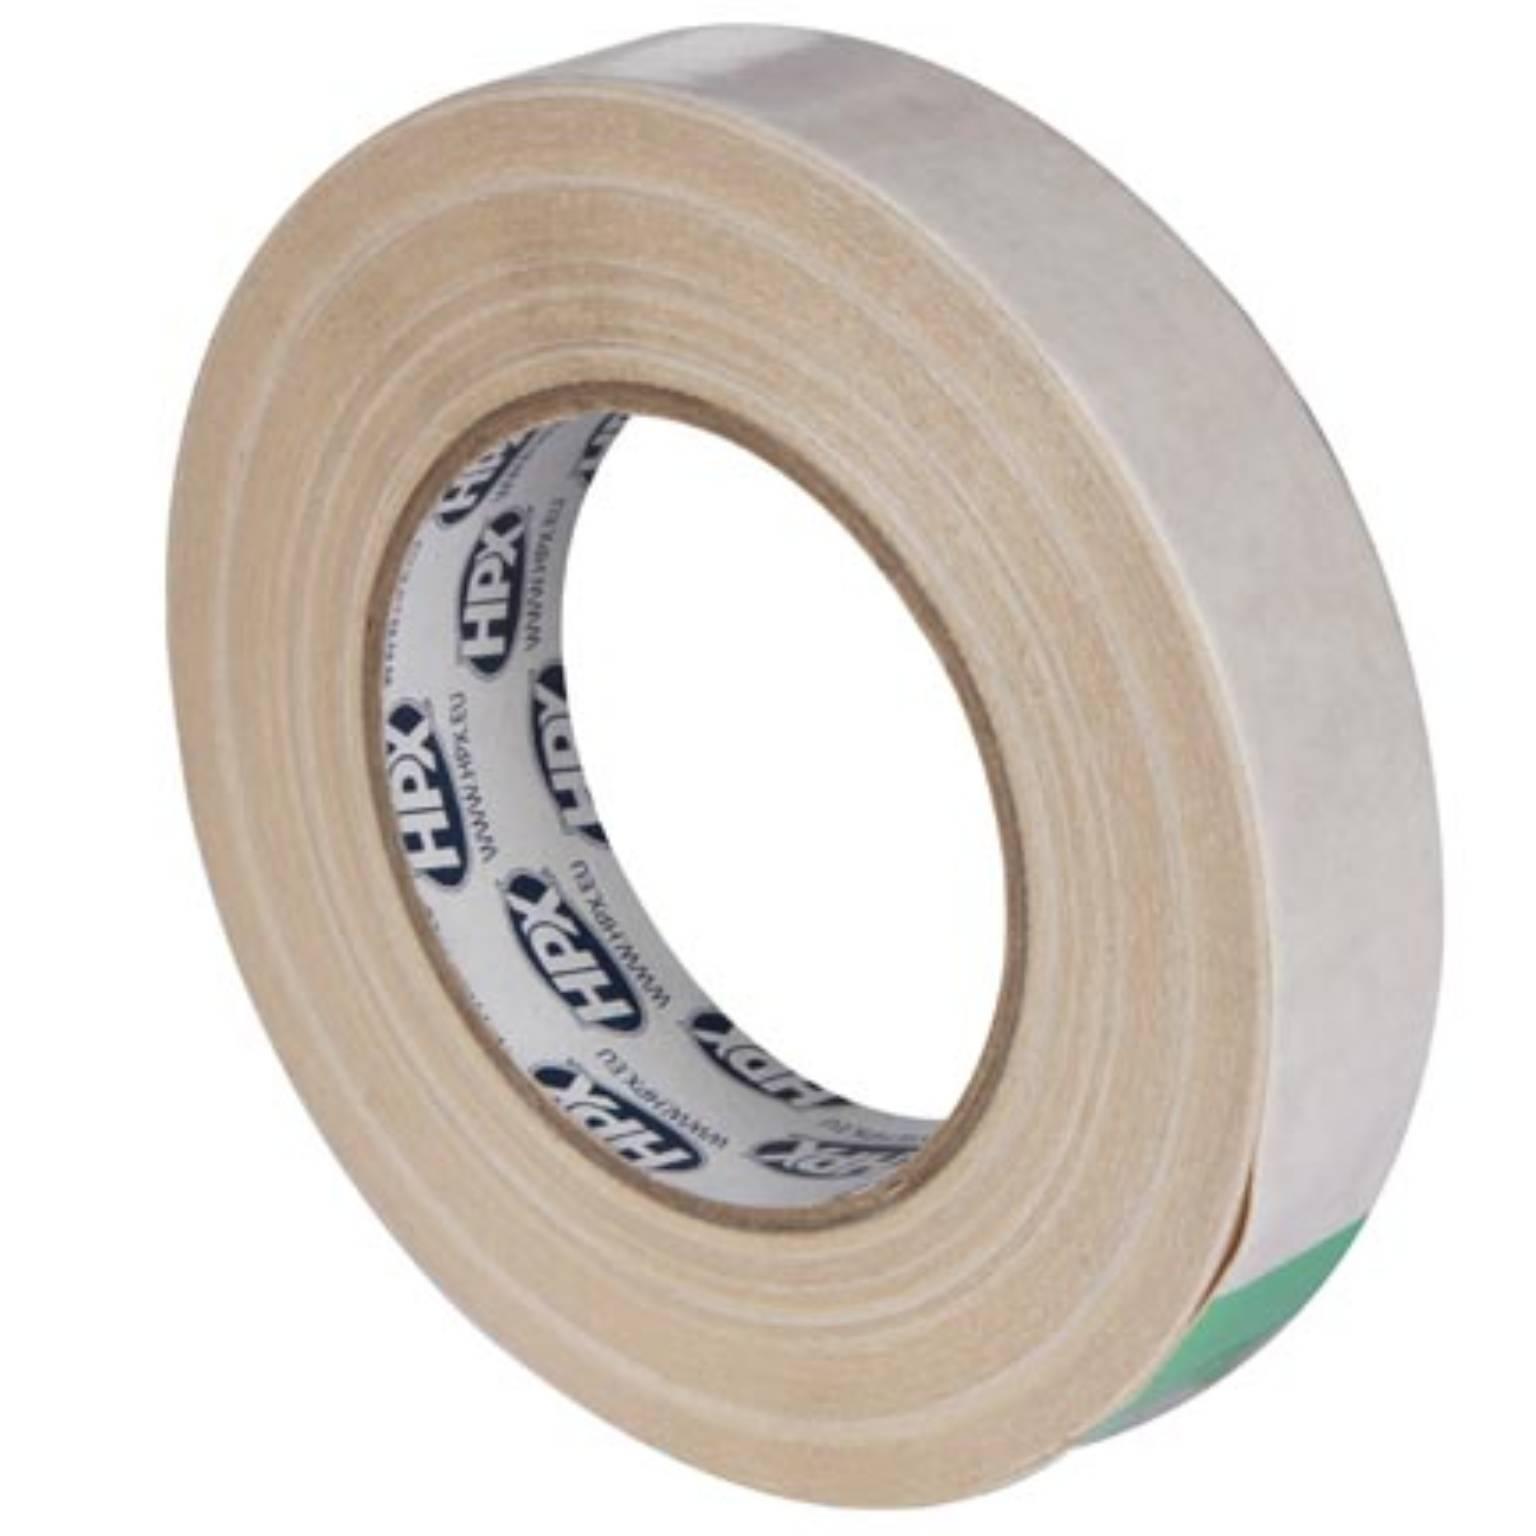 HPX - DOUBLE SIDED CARPET TAPE (25mm x 25m)